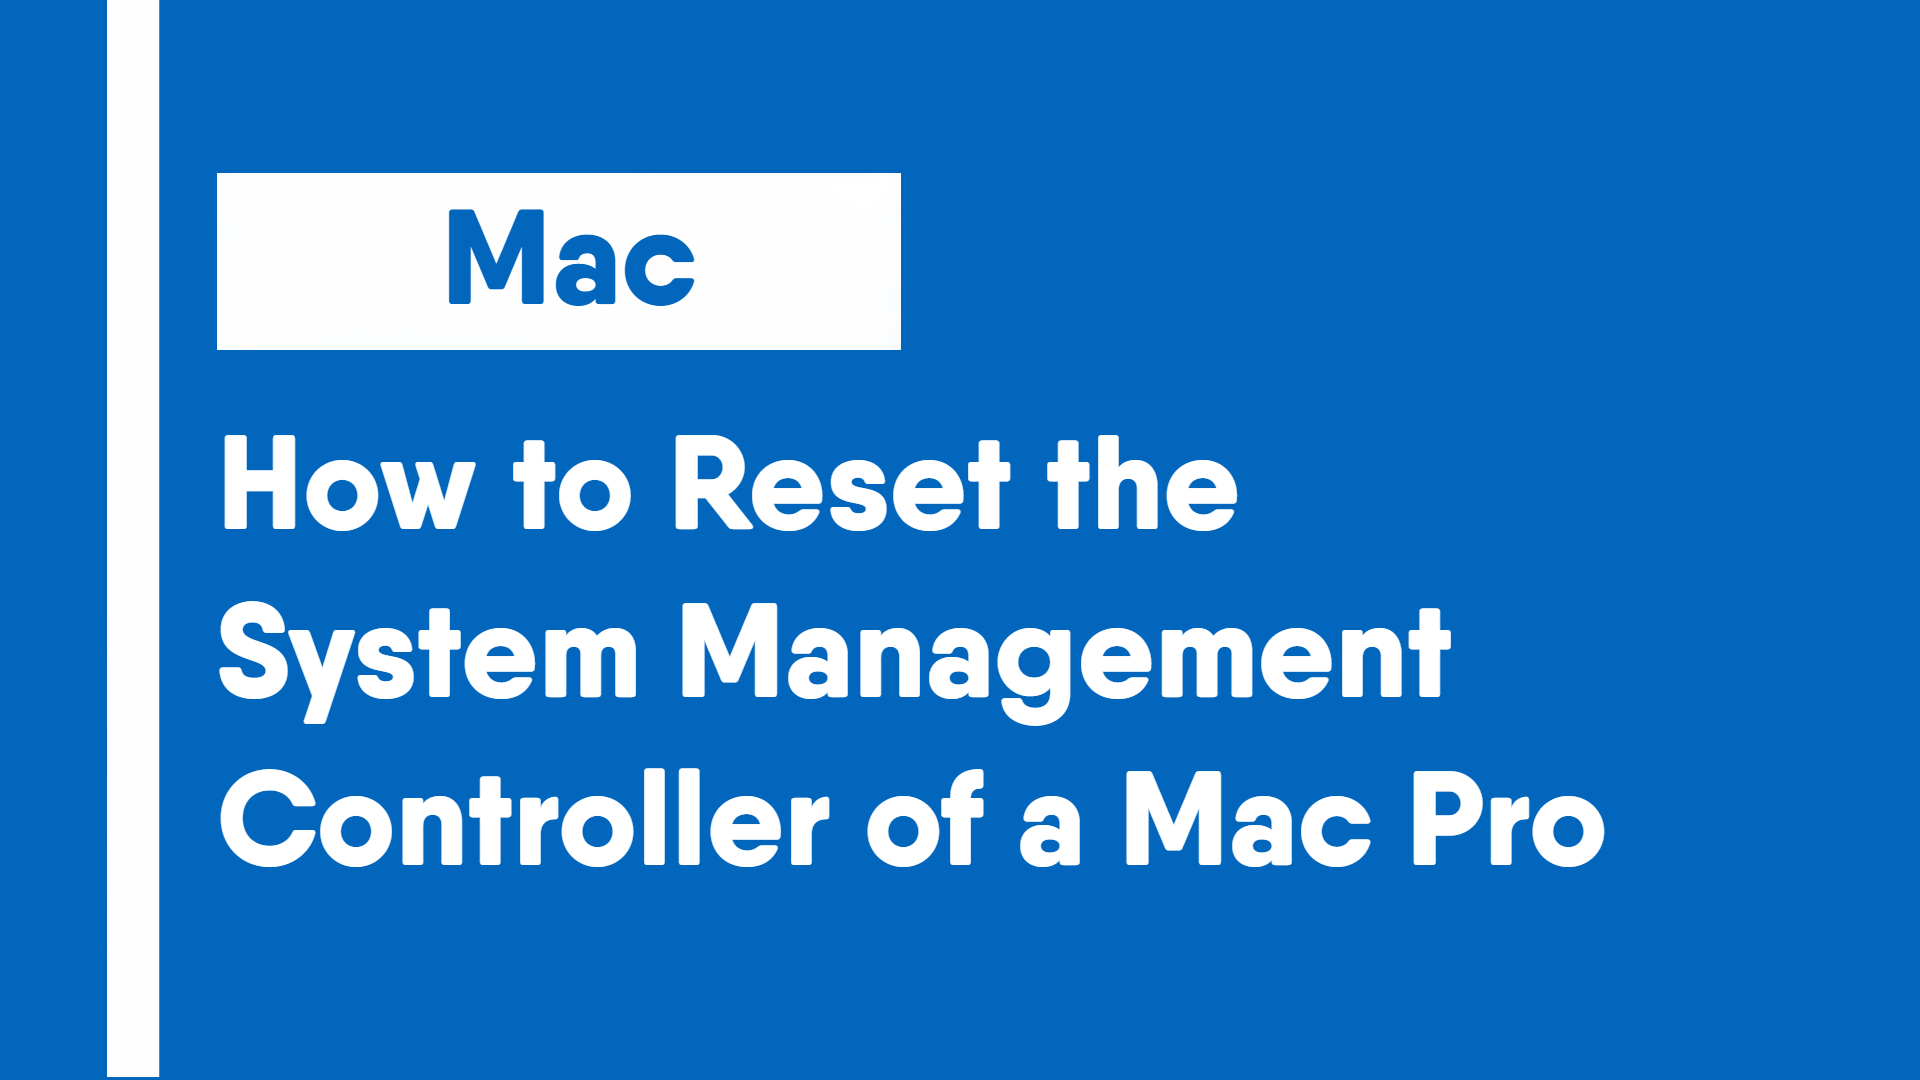 How to Reset the System Management Controller of a Mac Pro